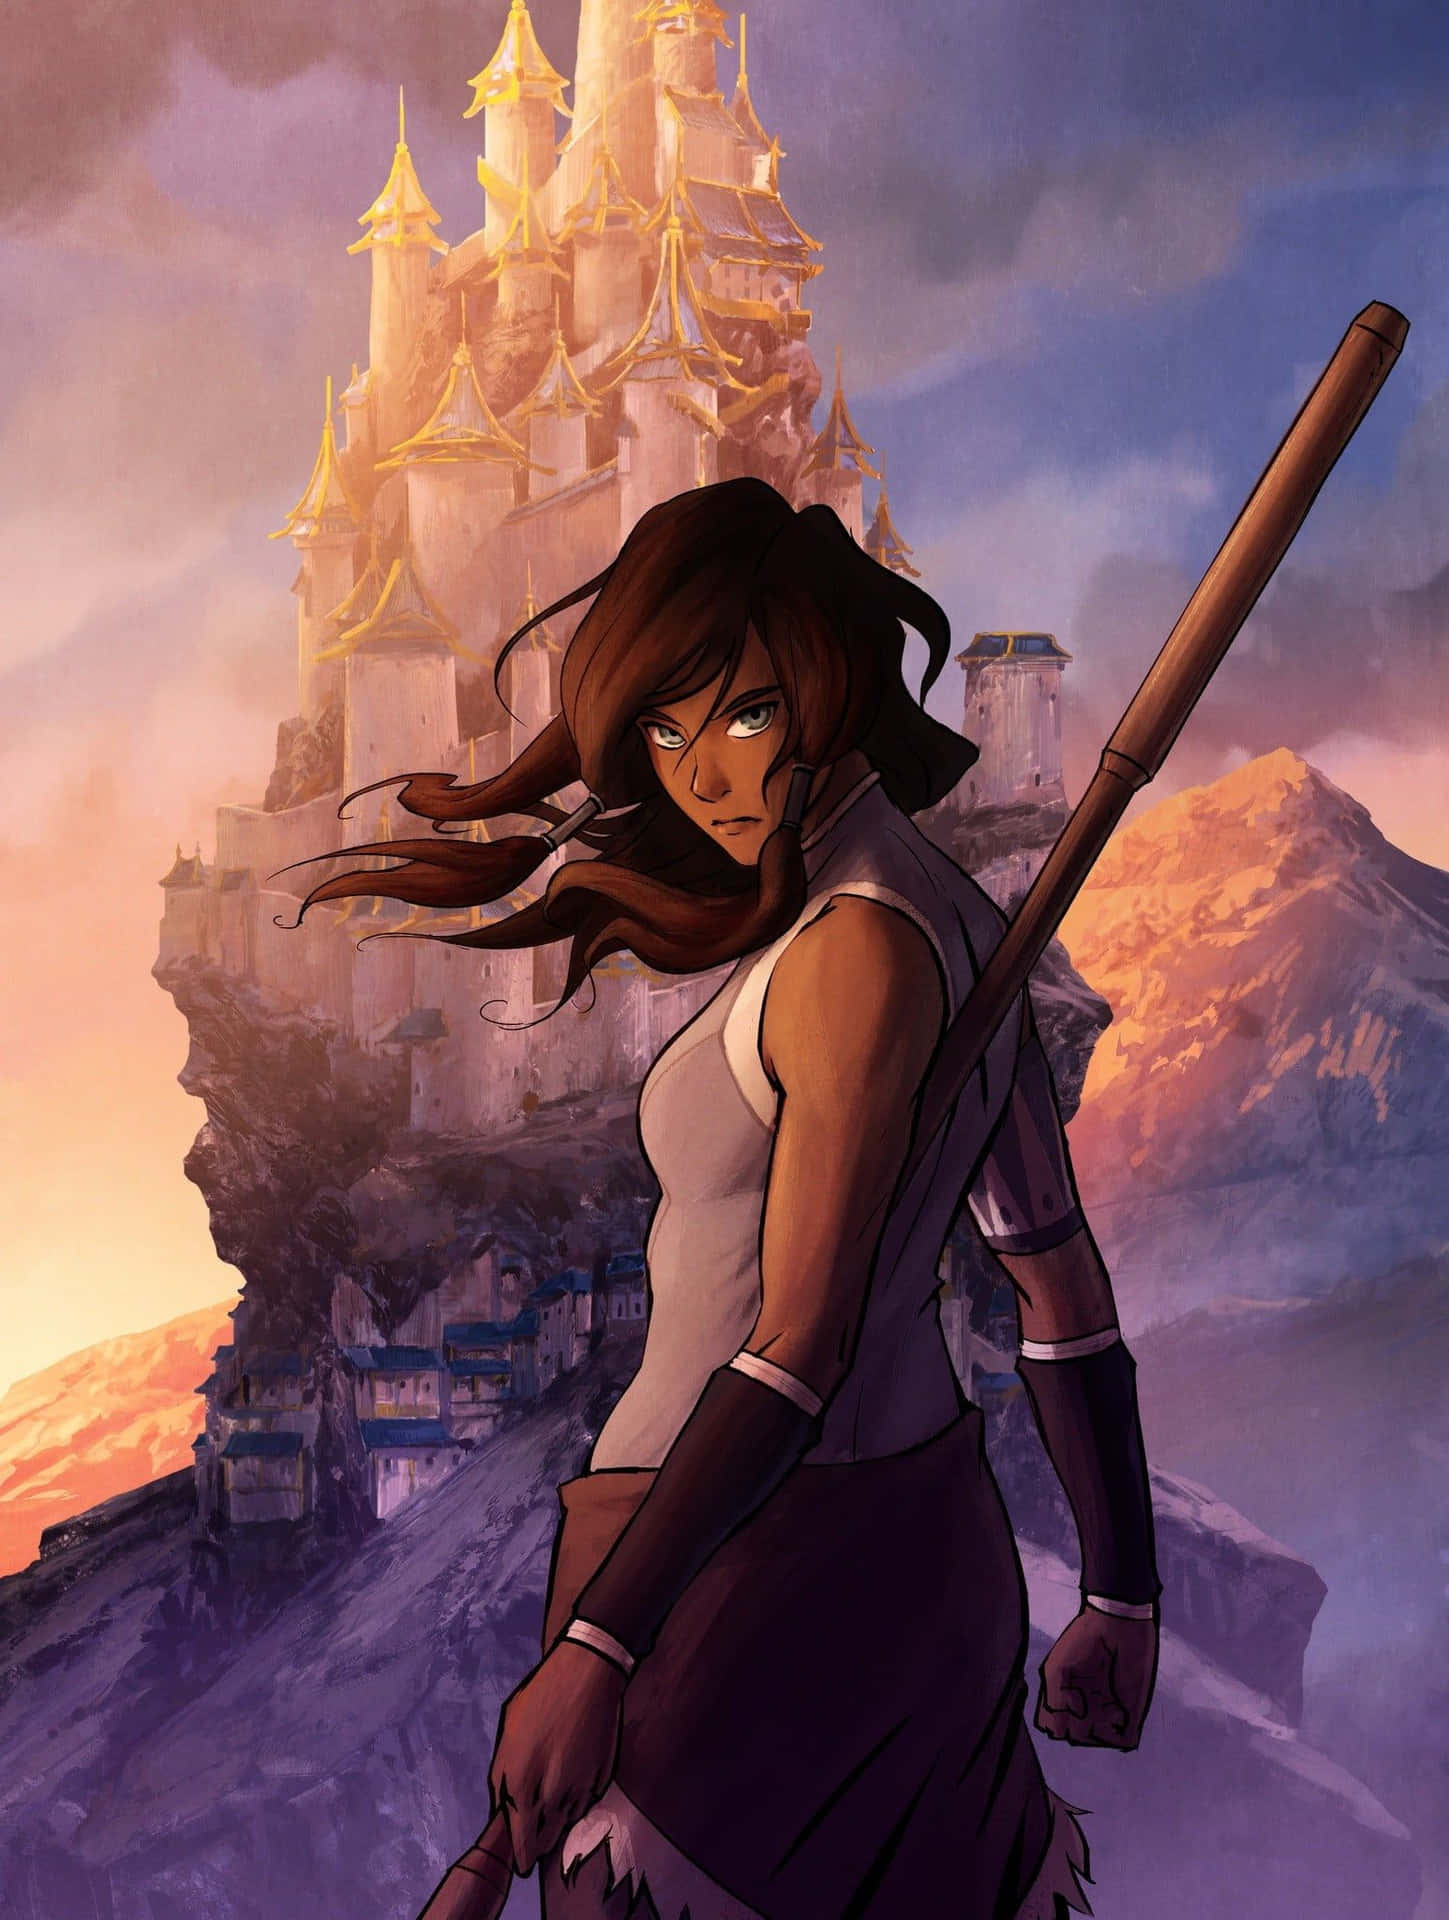 Korra is Ready to Take on Her New Quest Wallpaper